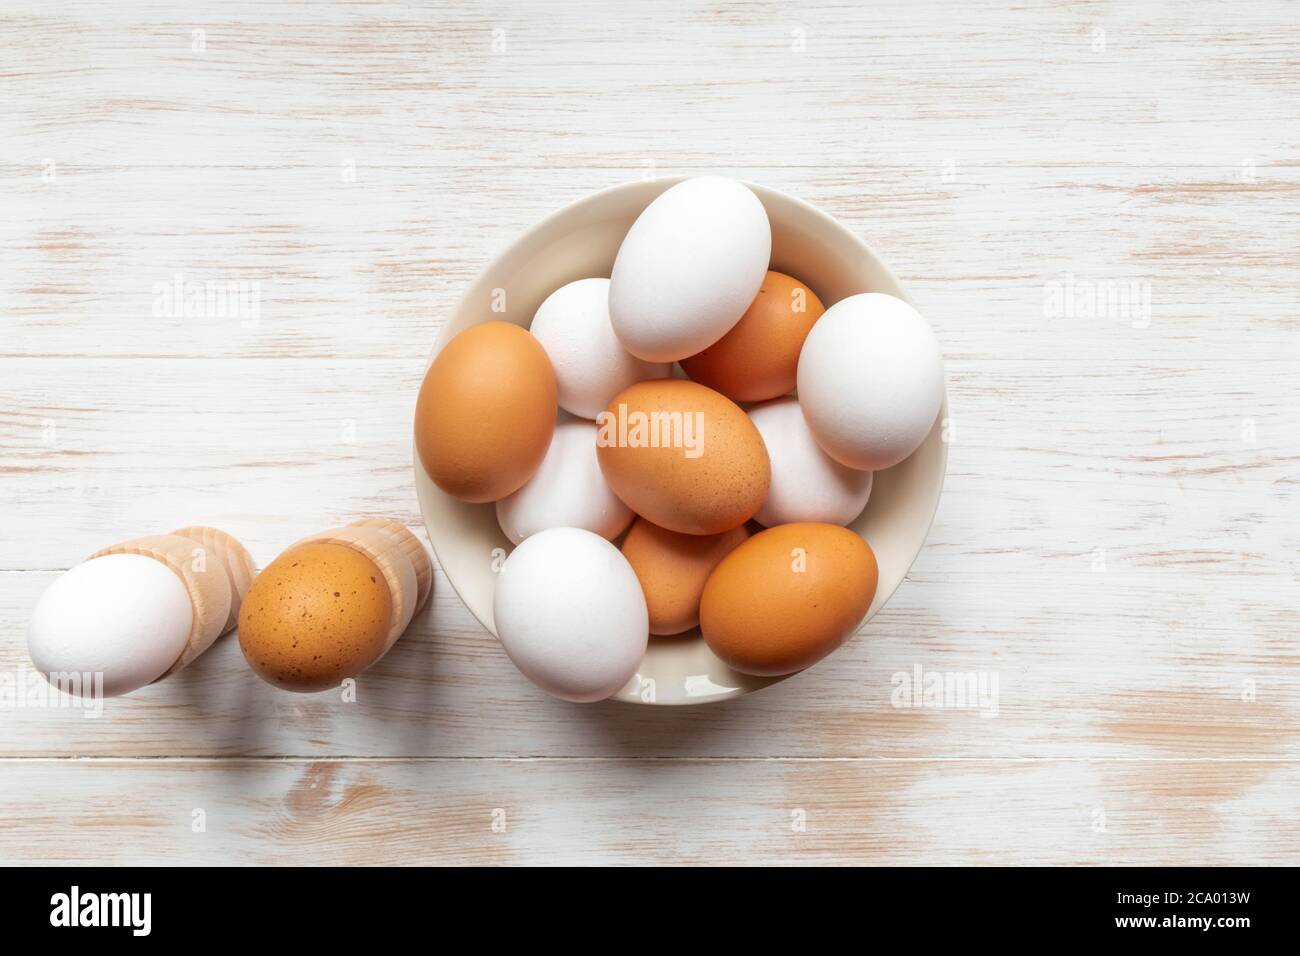 Brown and white eggs in bowl on wood background. Free-range organic eggs. Plate with brown and white chicken eggs, boiled eggs in holders on table Stock Photo